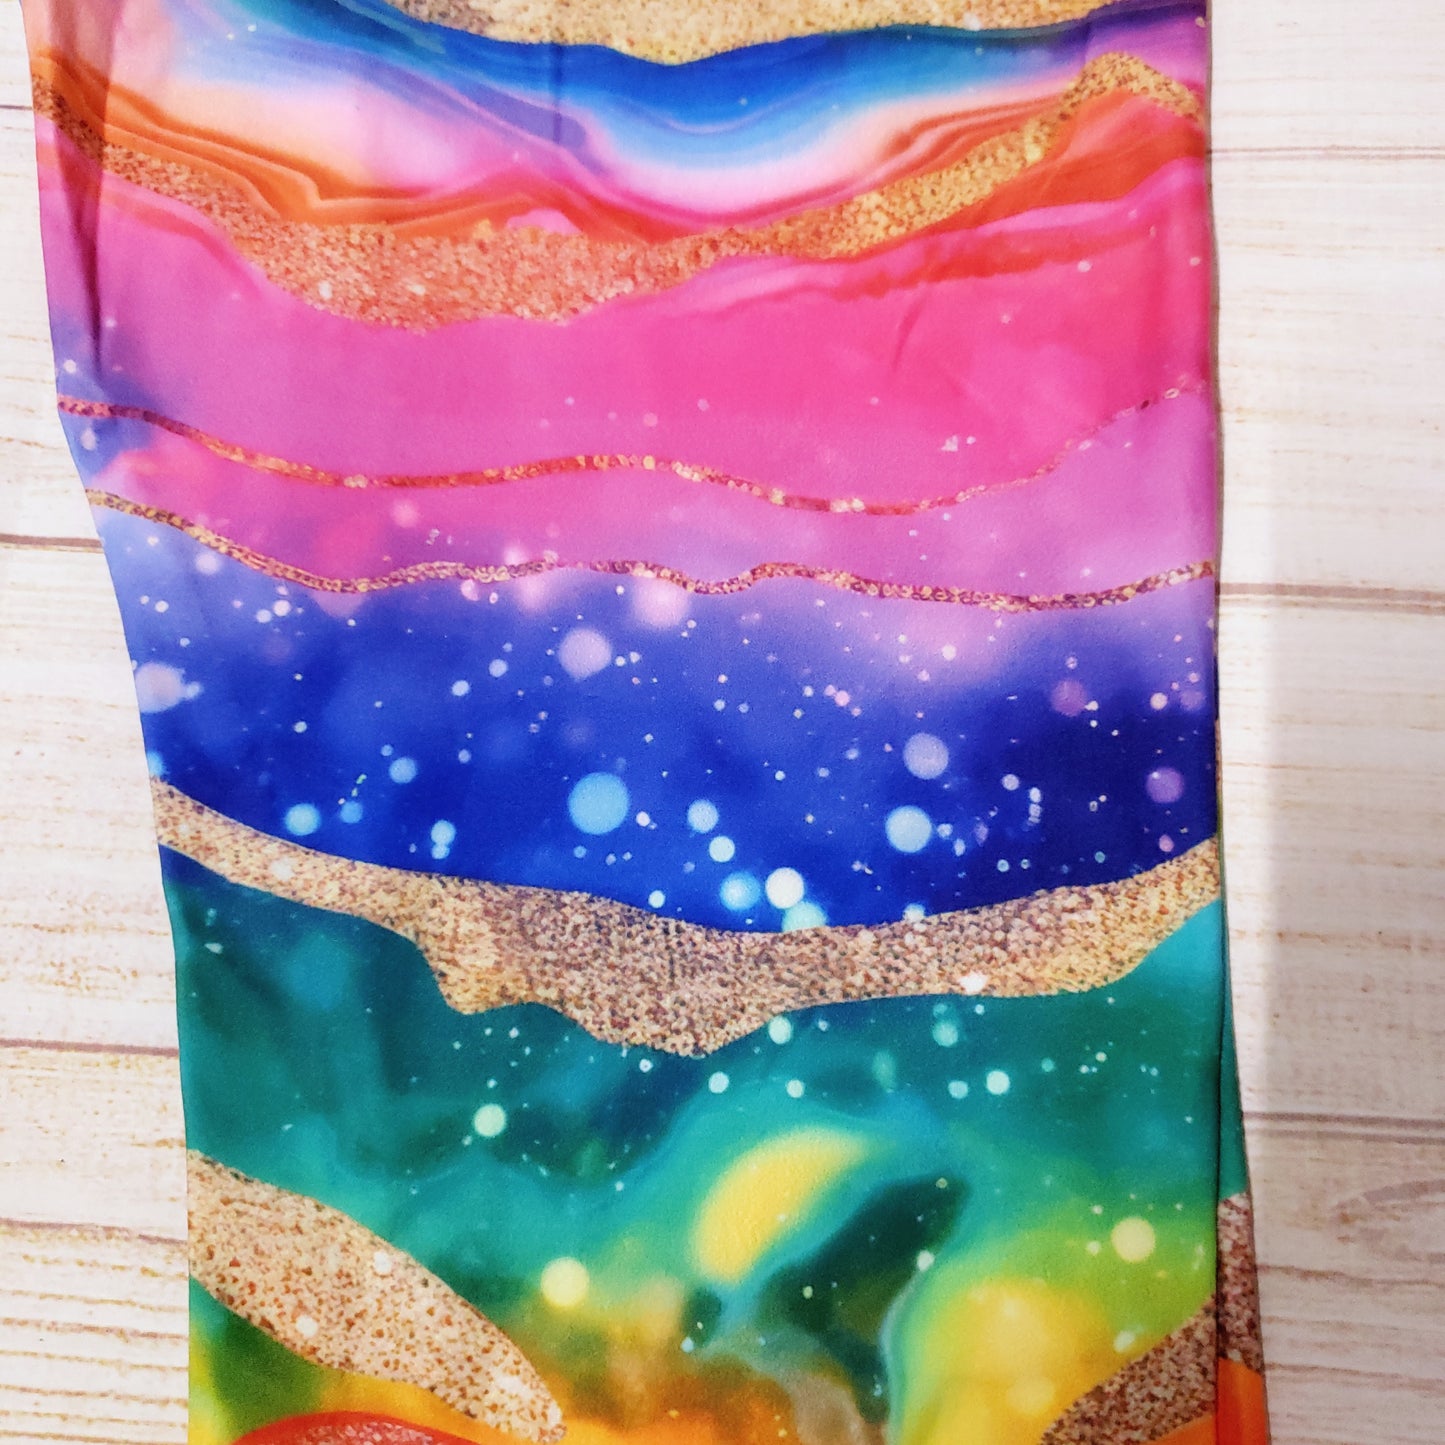 Rainbow agate 3 capris, shorts and skorts with pockets